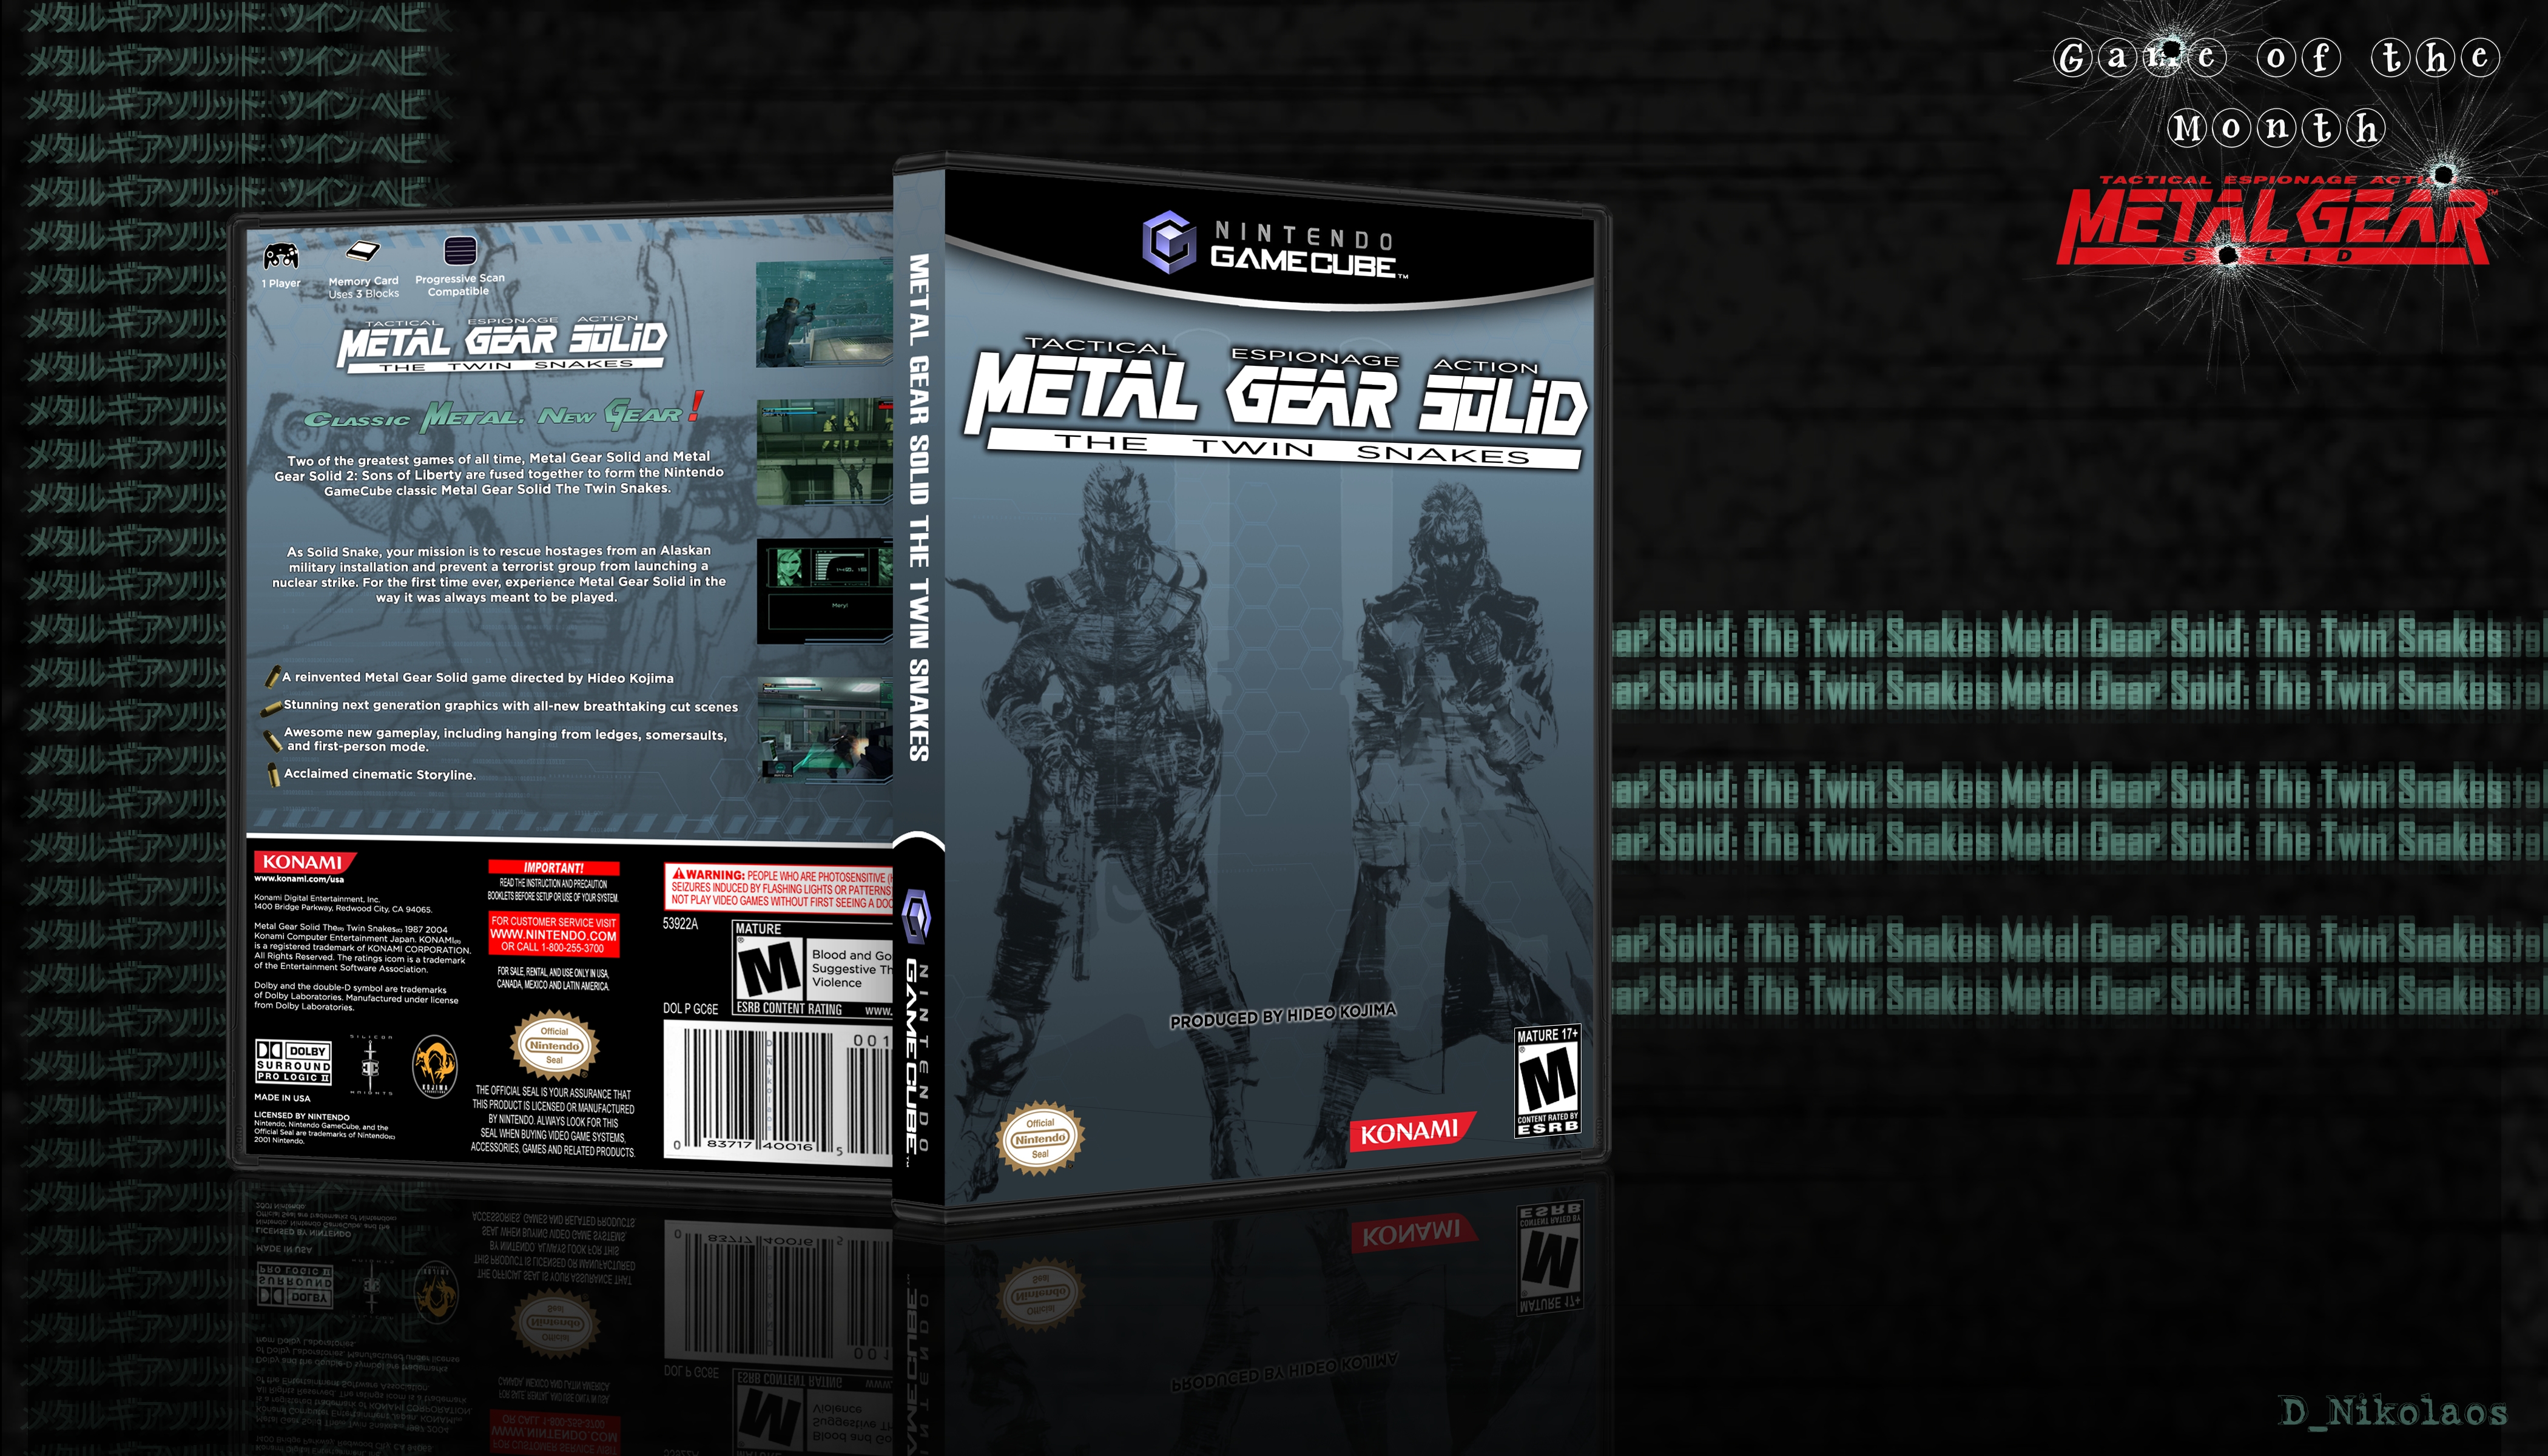 Metal Gear Solid The Twin Snakes box cover